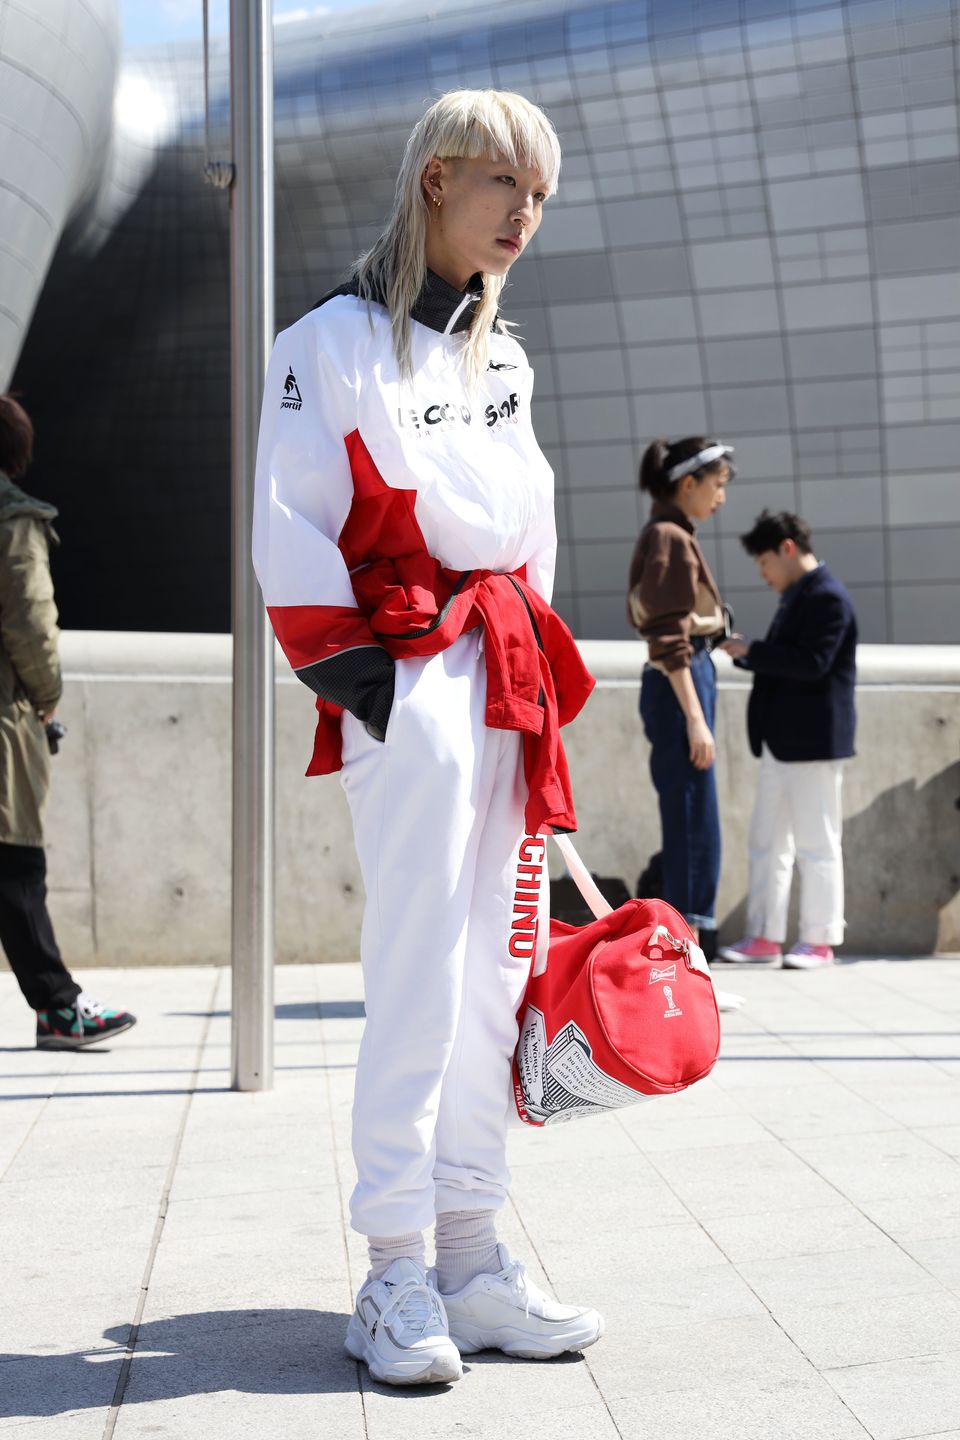 Seoul Street Style Photos Will Seriously Inspire You To Up Your Fashion Game Huffpost Uk Style 8266